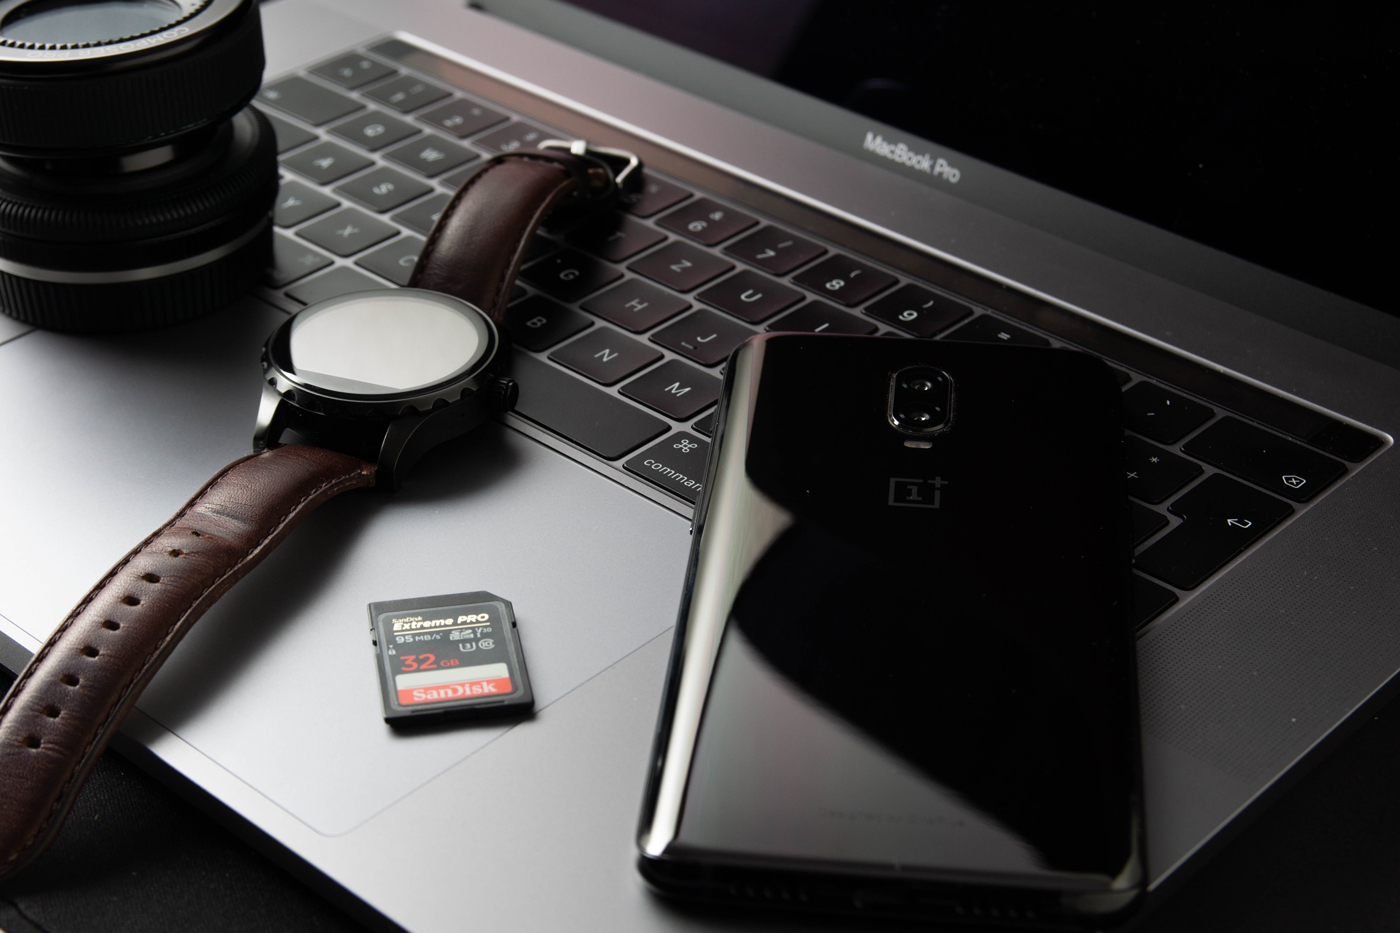 A OnePlus 8 Pro on an open Macbook next to an SD card and a smart watch